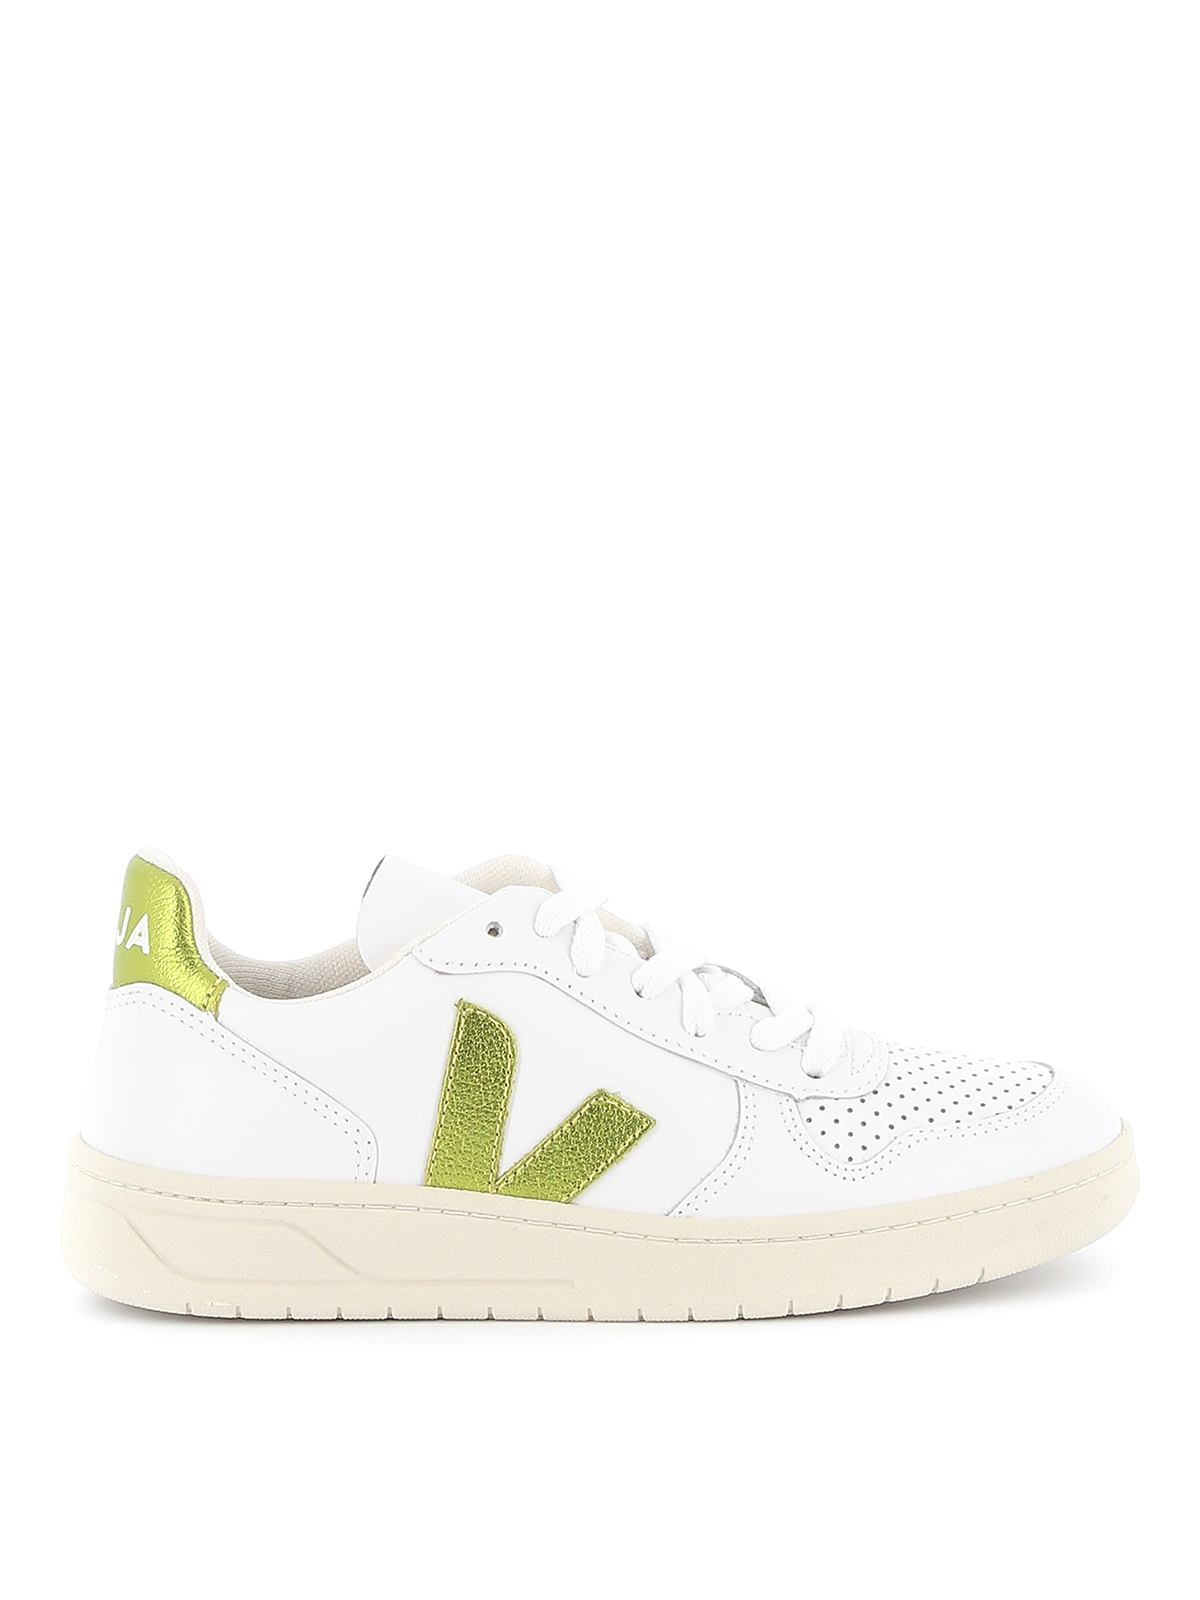 Trainers Veja - V-10 extra yellow laminated V sneakers - VX021932